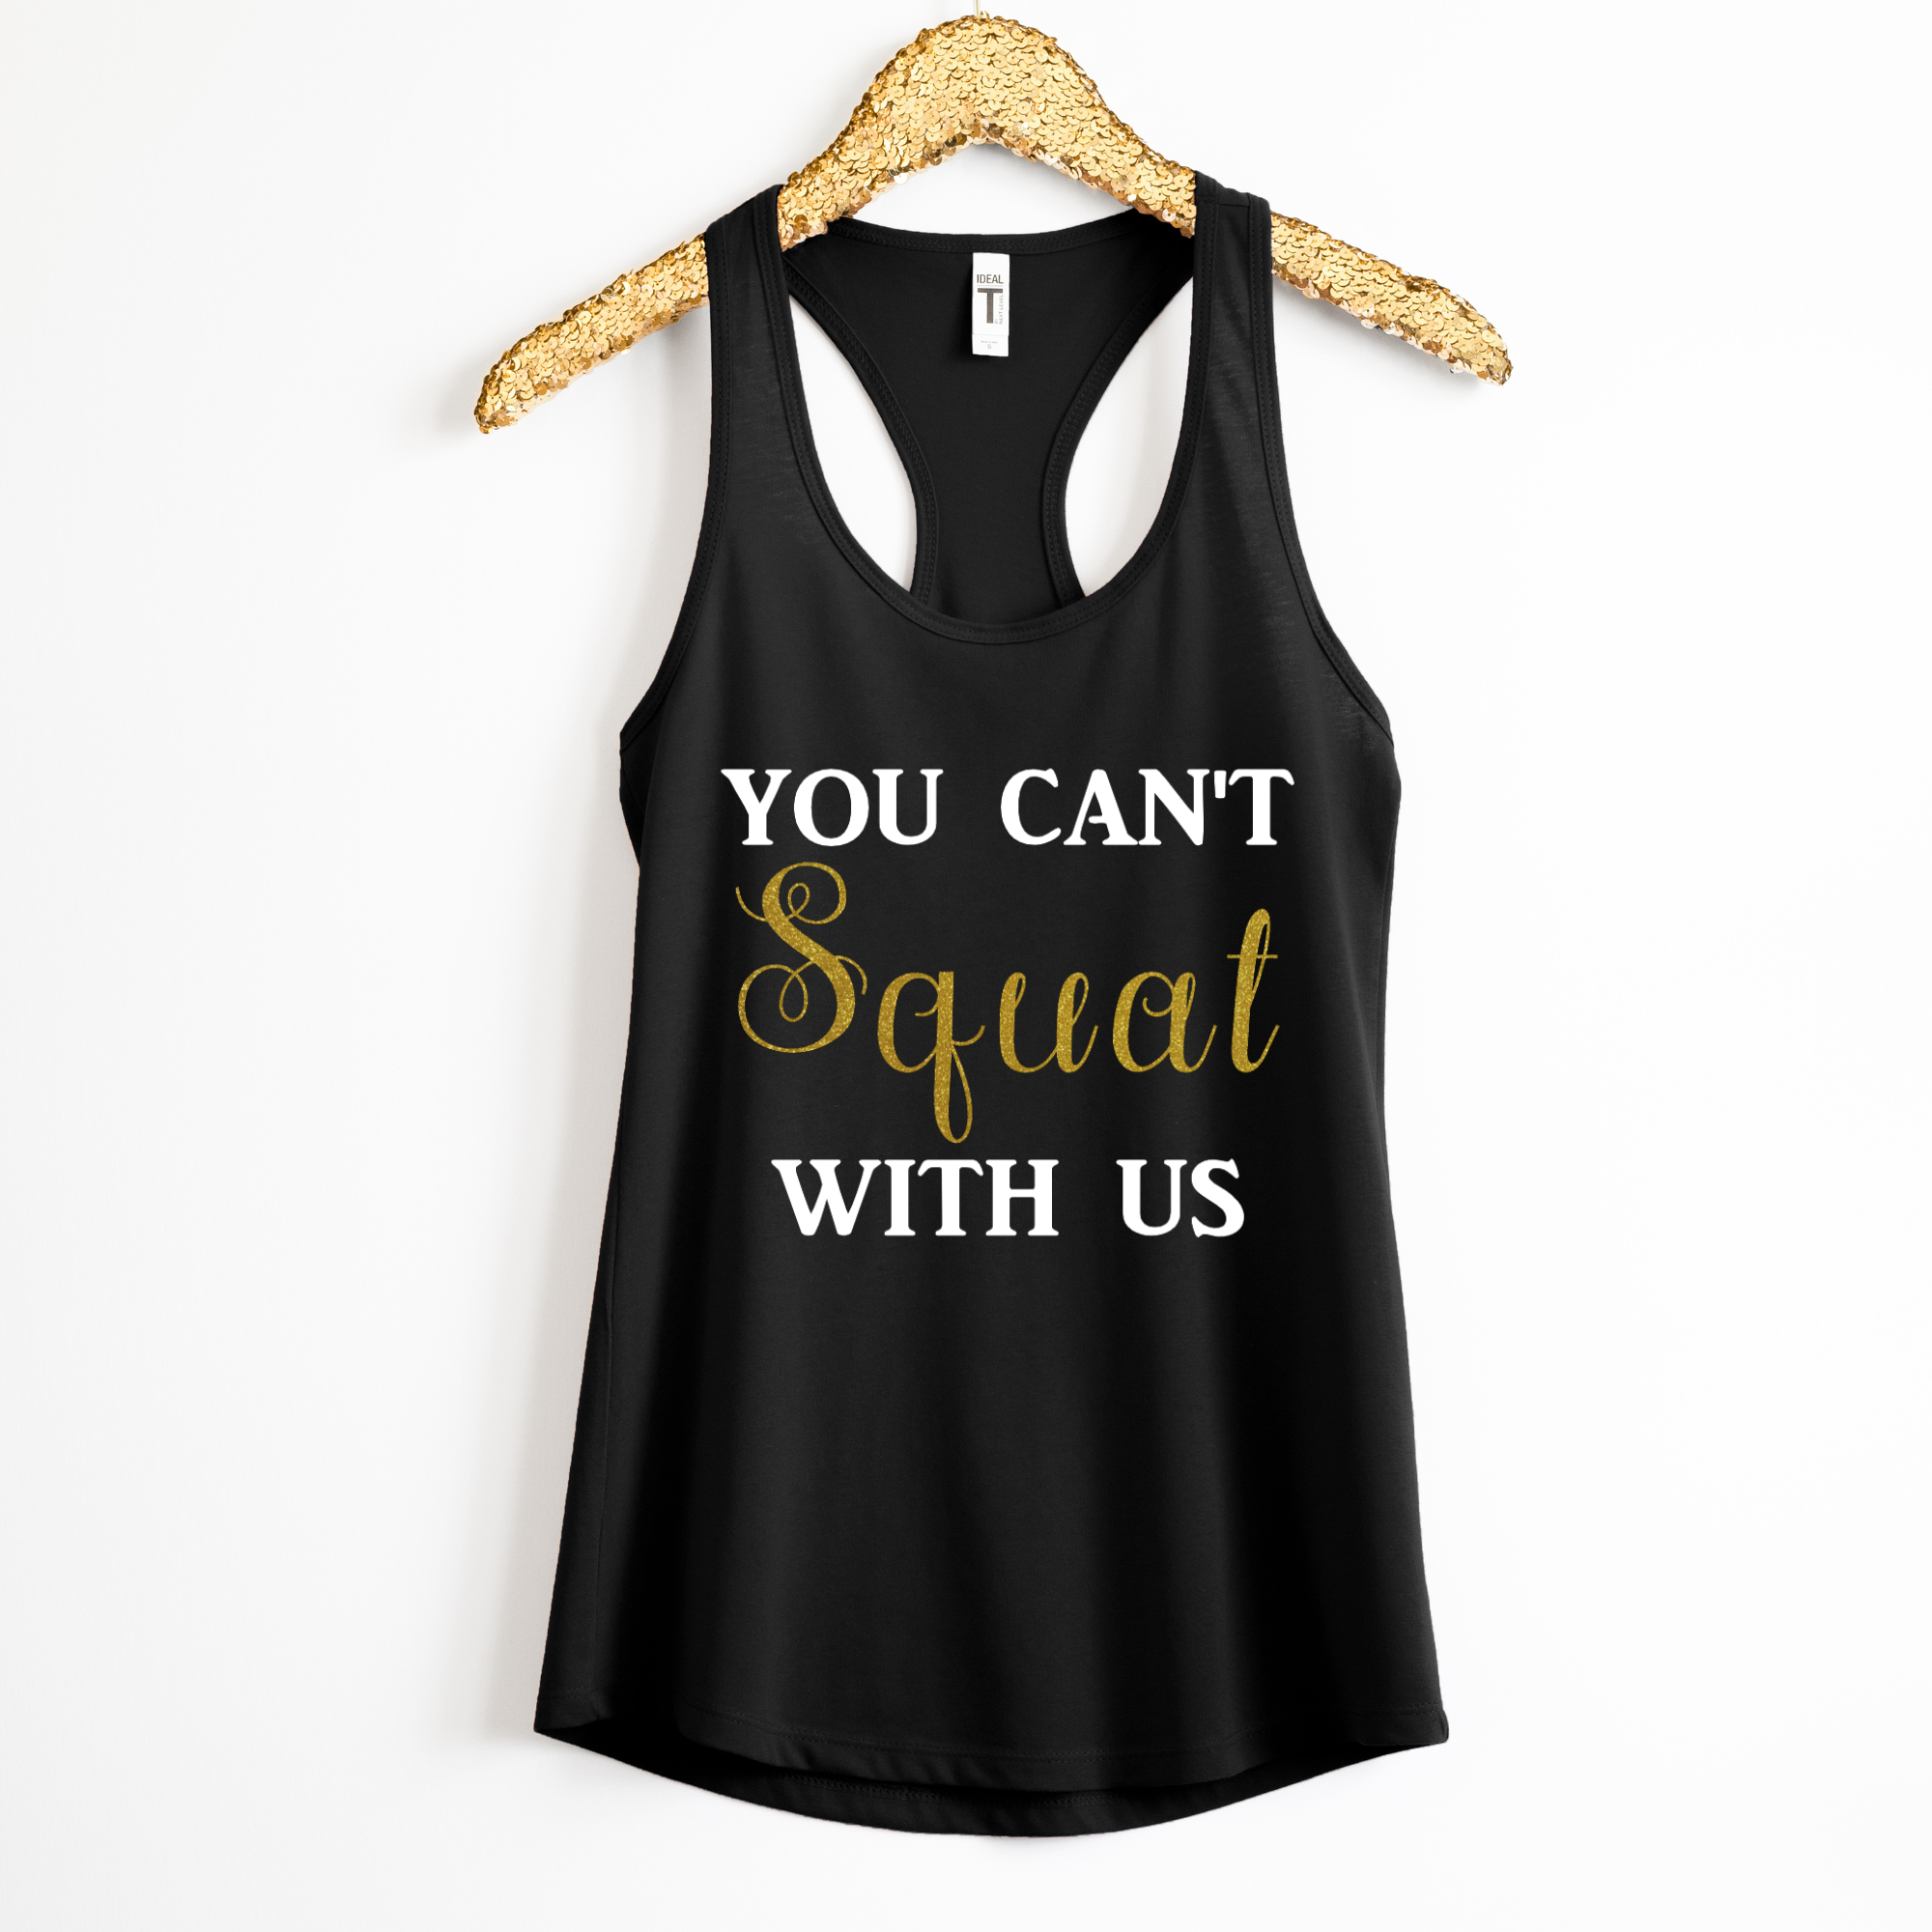 You Cant Squat With Us Shirt